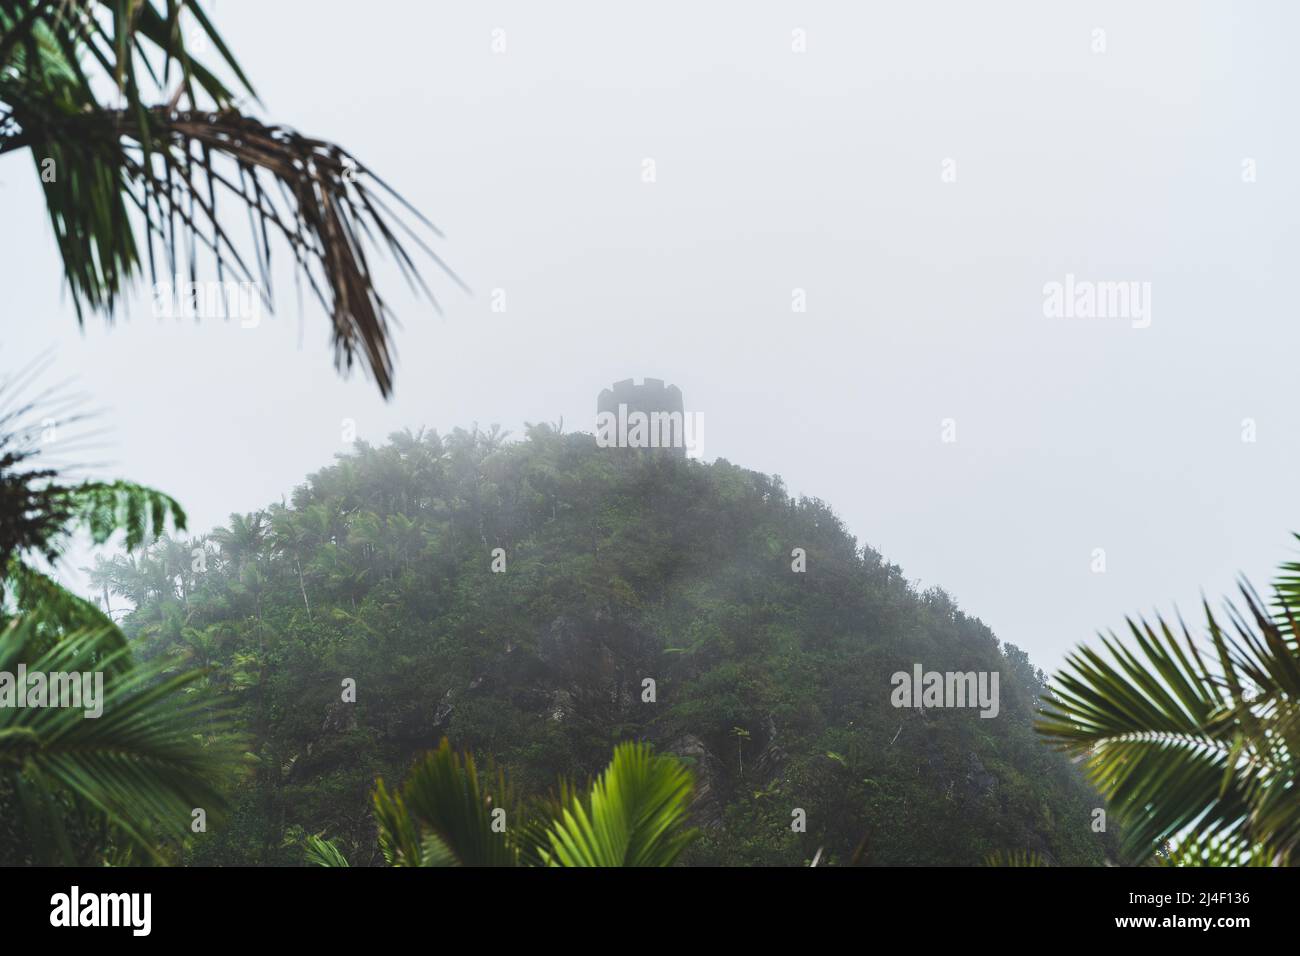 Lookout tower on mountain top surrounded by jungle in mist Stock Photo